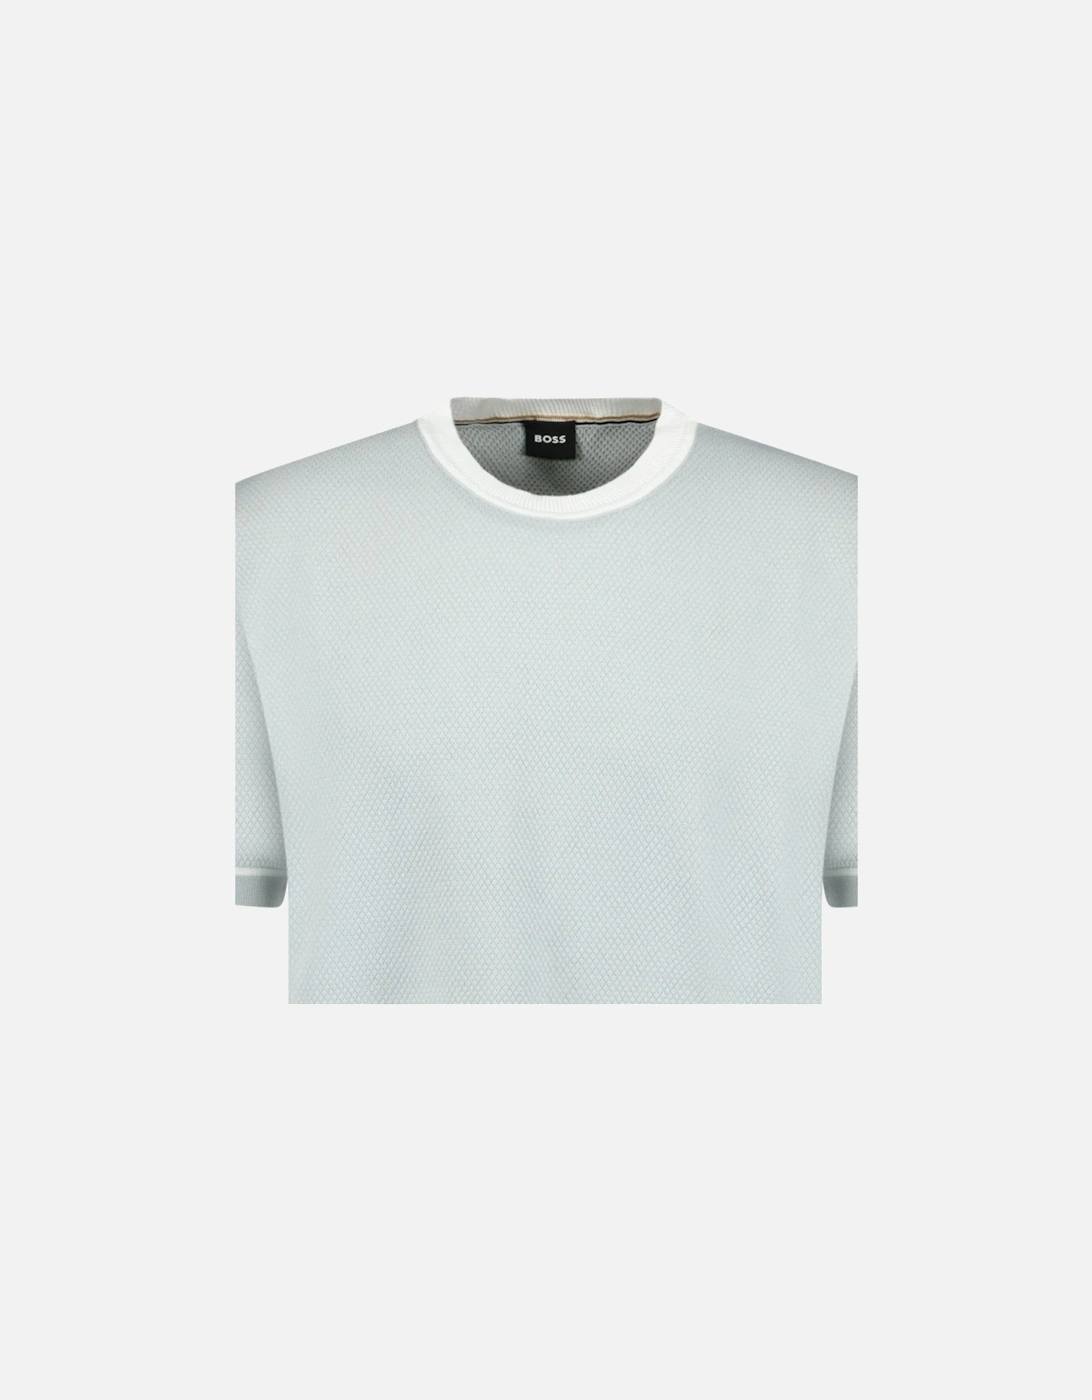 Grosso Knit T Shirt Pastel Grey